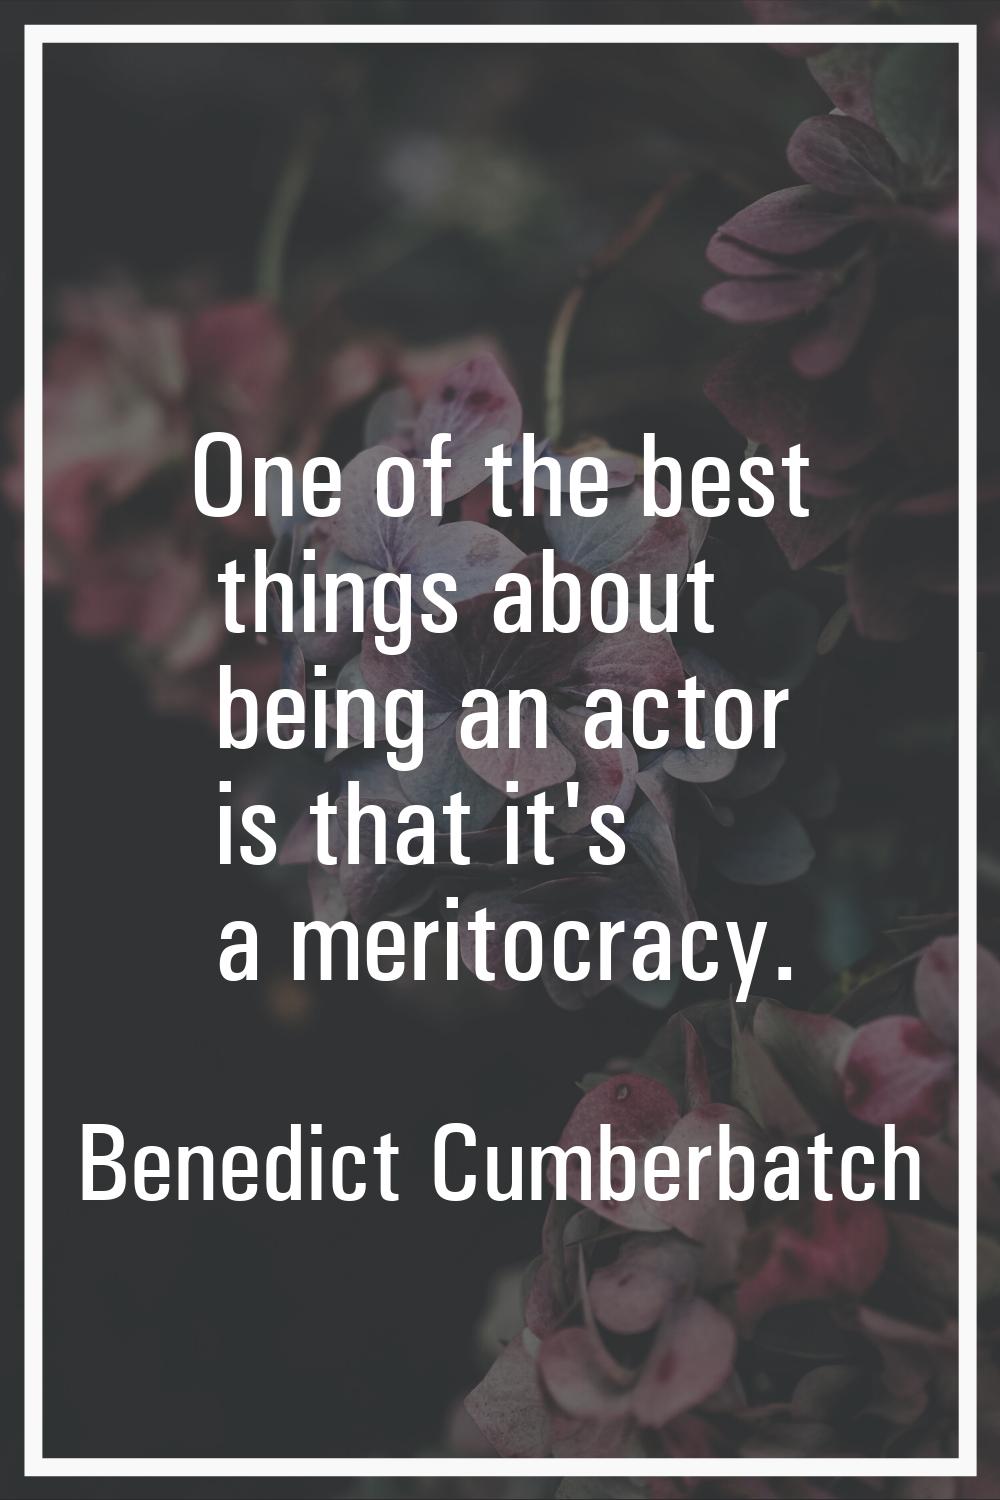 One of the best things about being an actor is that it's a meritocracy.